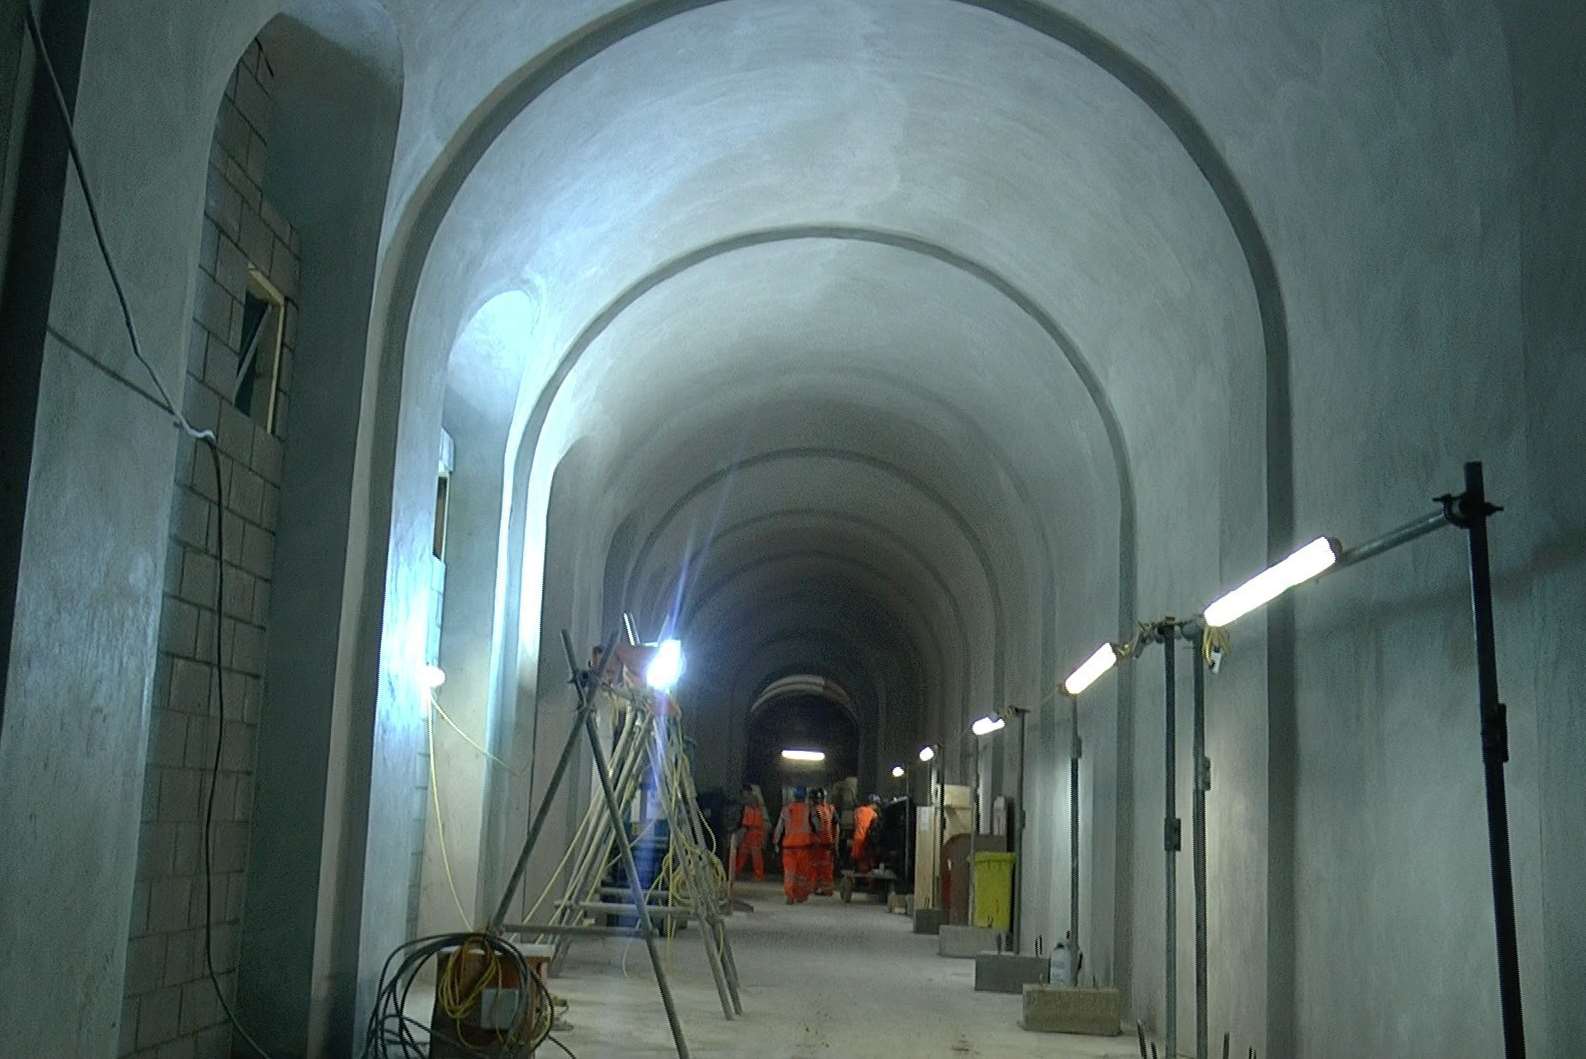 The redevelopment has reinforced existing archways in London Bridge